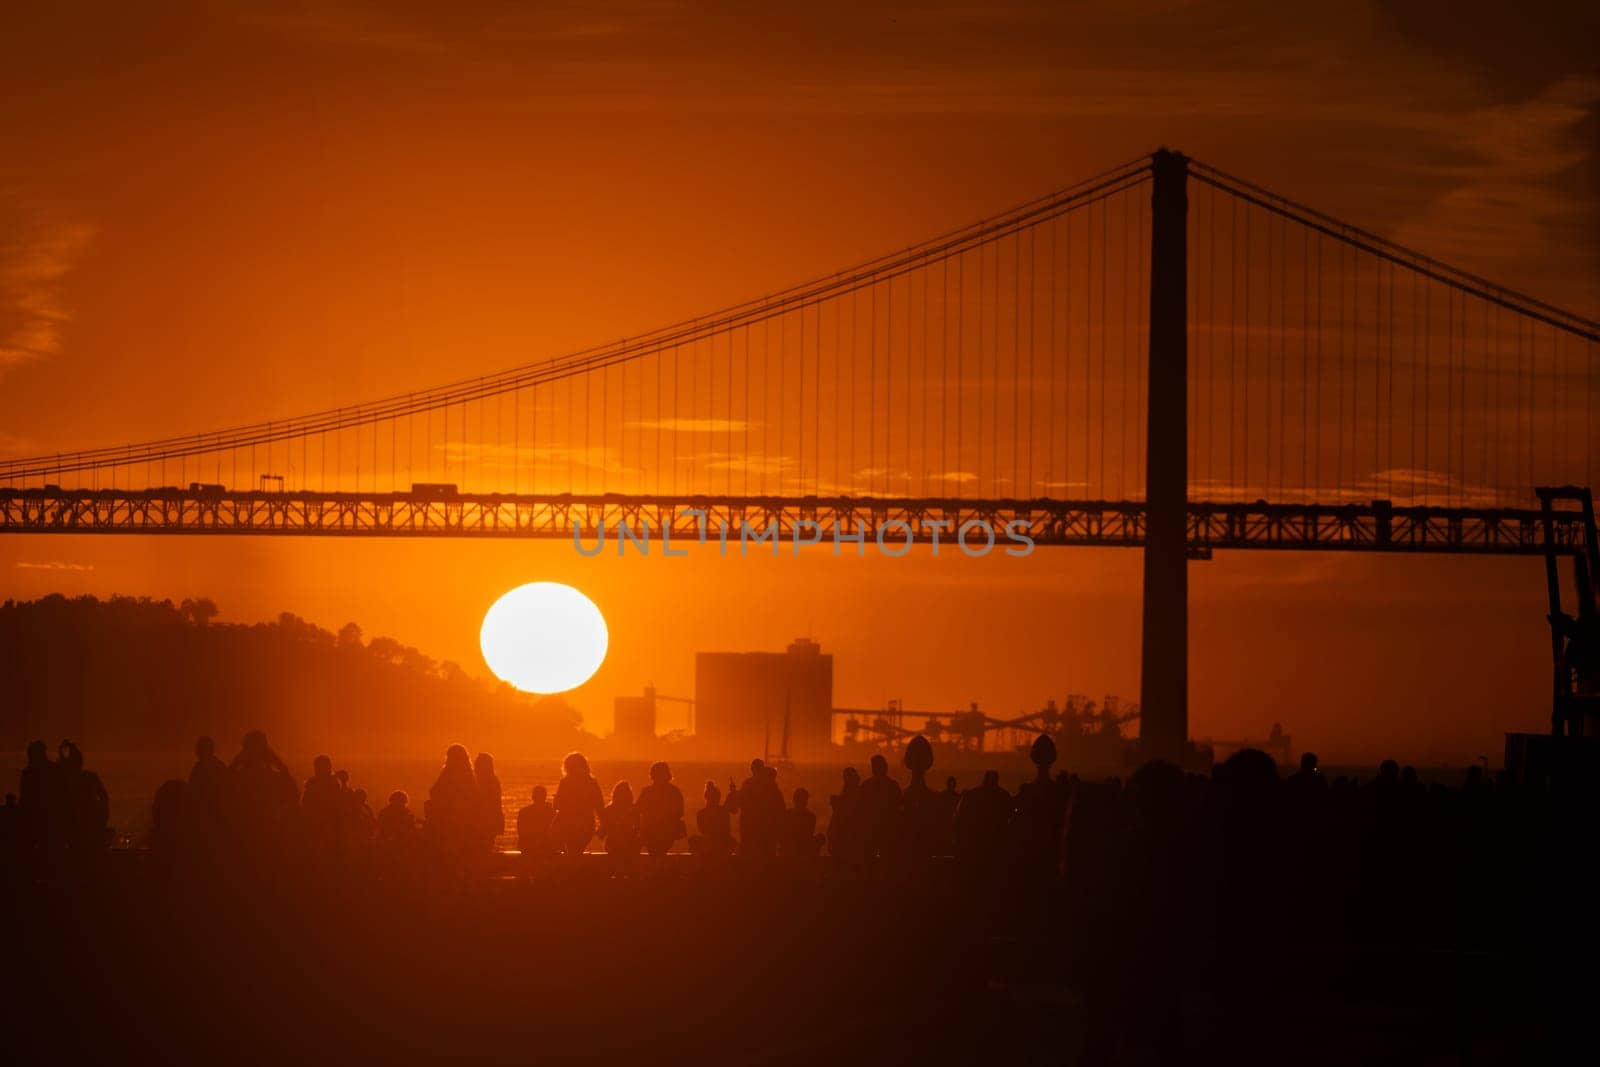 Sunset Serenity: A Majestic Suspension Bridge Bathed in the red Glow of the Setting Sun by Studia72